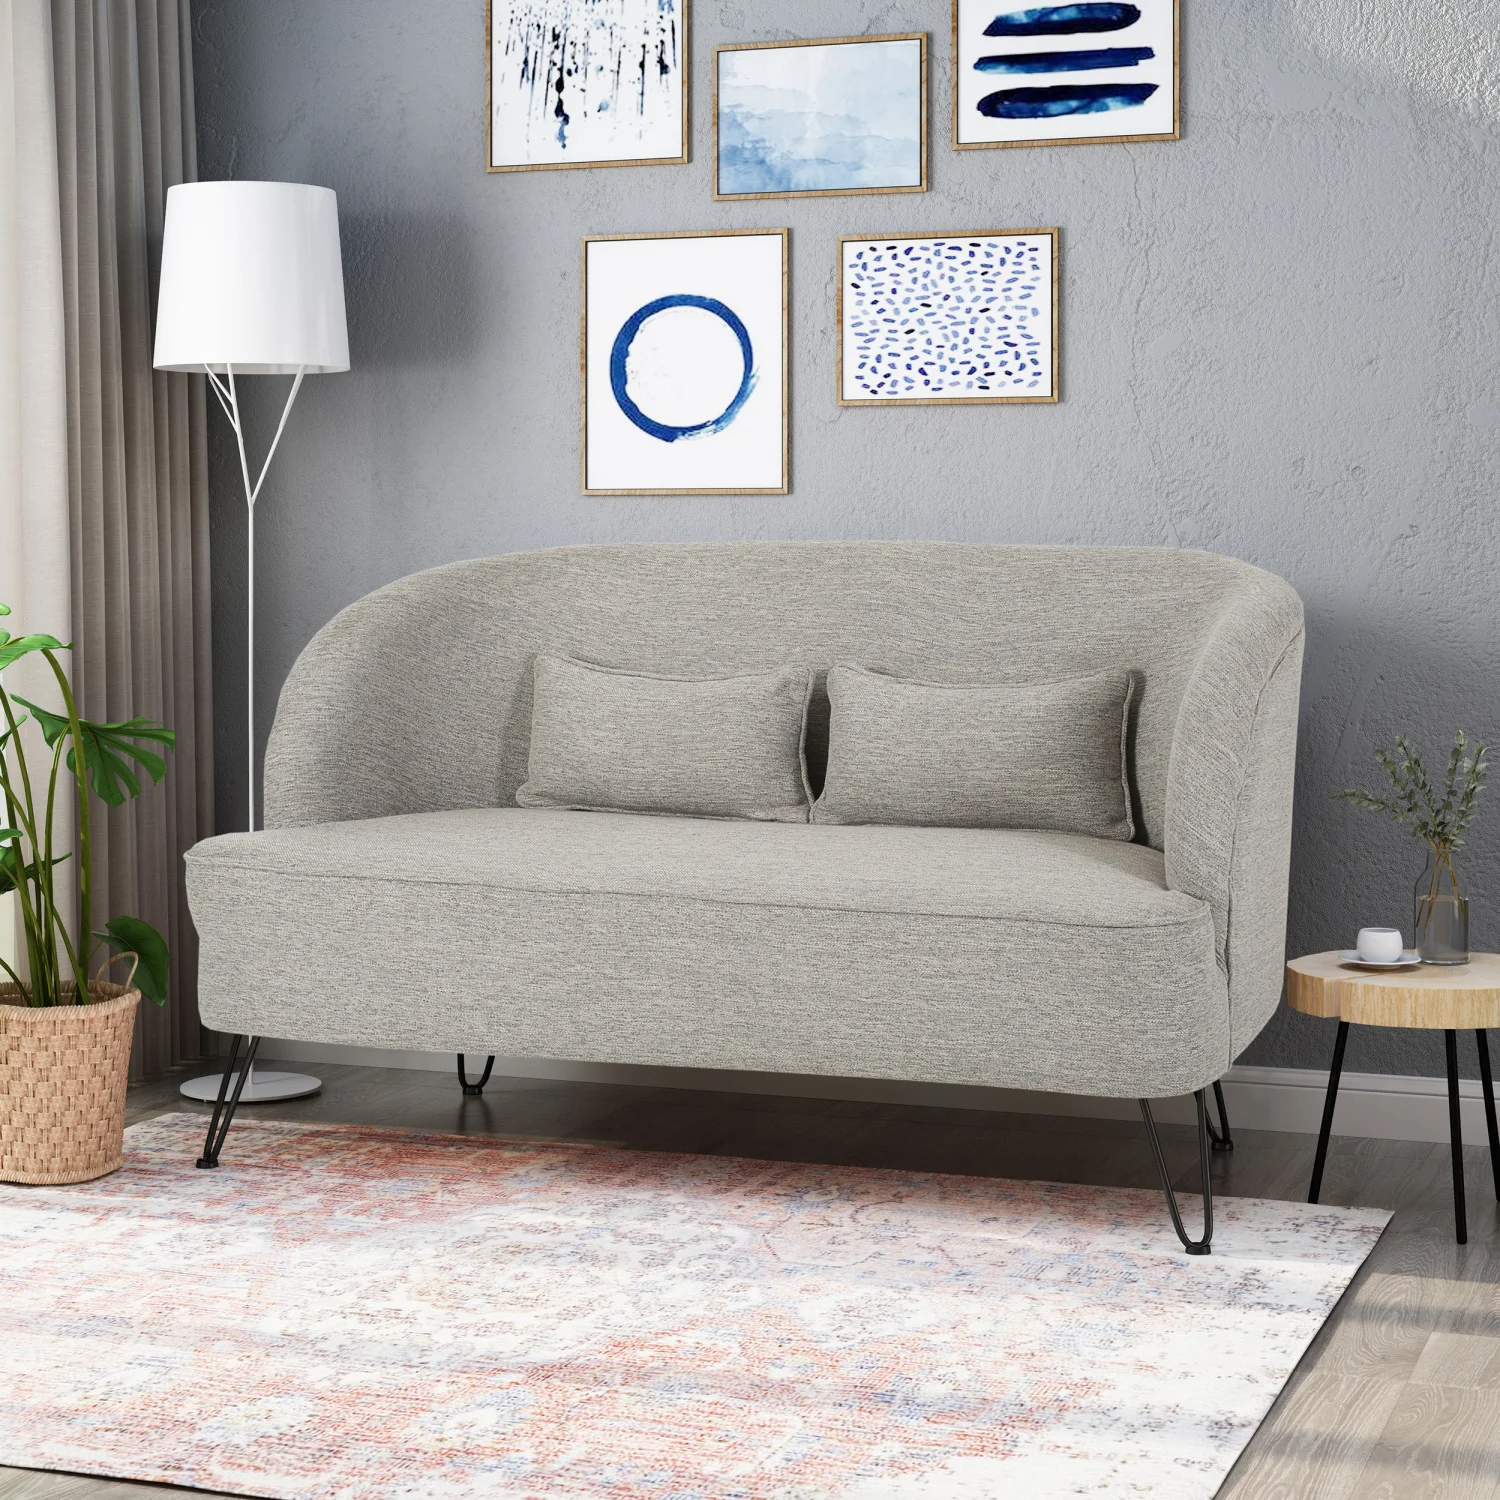 

Cozy and elegant upholstered love seat in charming light grey, perfect for small spaces and modern decor - Stylish and comfortab